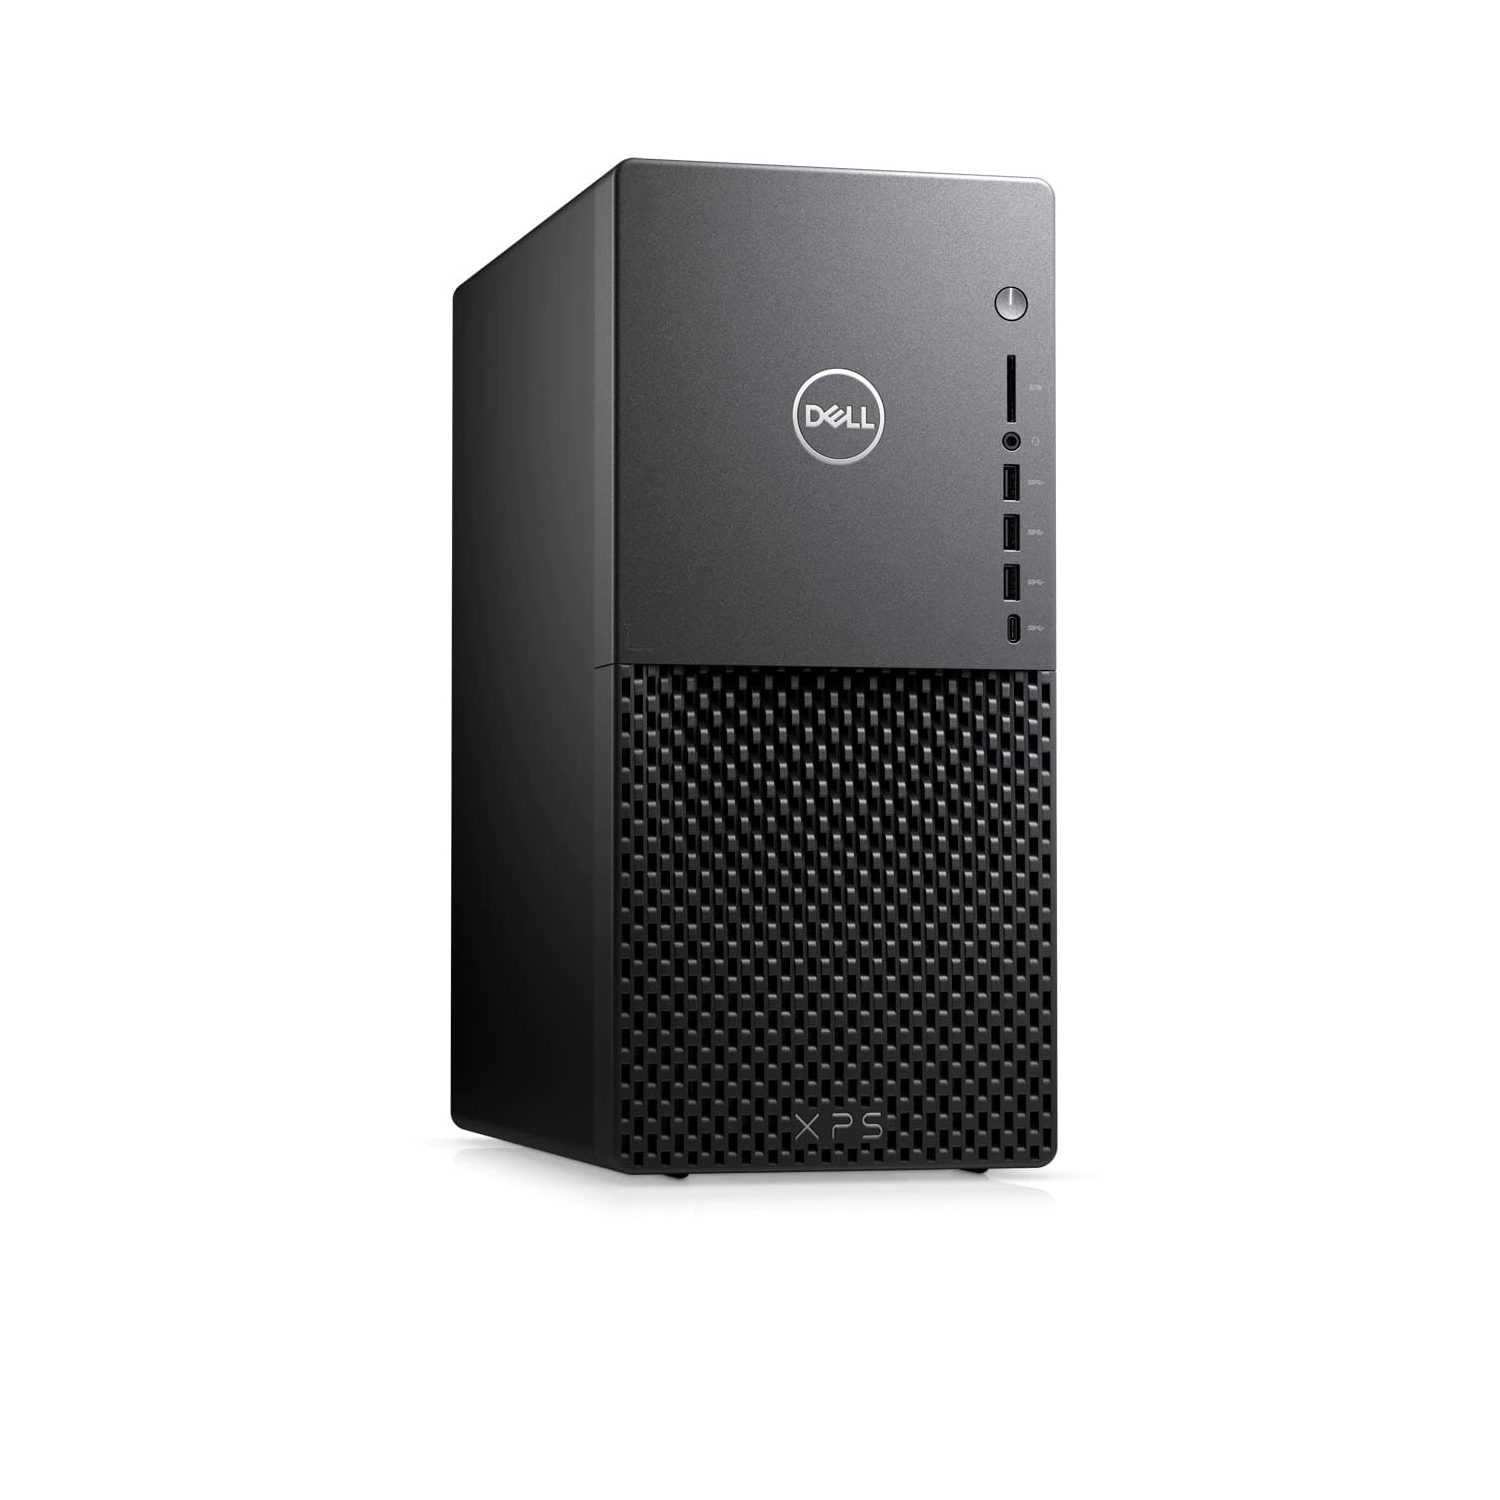 Refurbished (Excellent) - Dell XPS 8940 Desktop (2020) | Core i7 - 1TB HDD + 512GB SSD - 32GB RAM - RX 5700 | 8 Cores @ 4.9 GHz - 11th Gen CPU Certified Refurbished